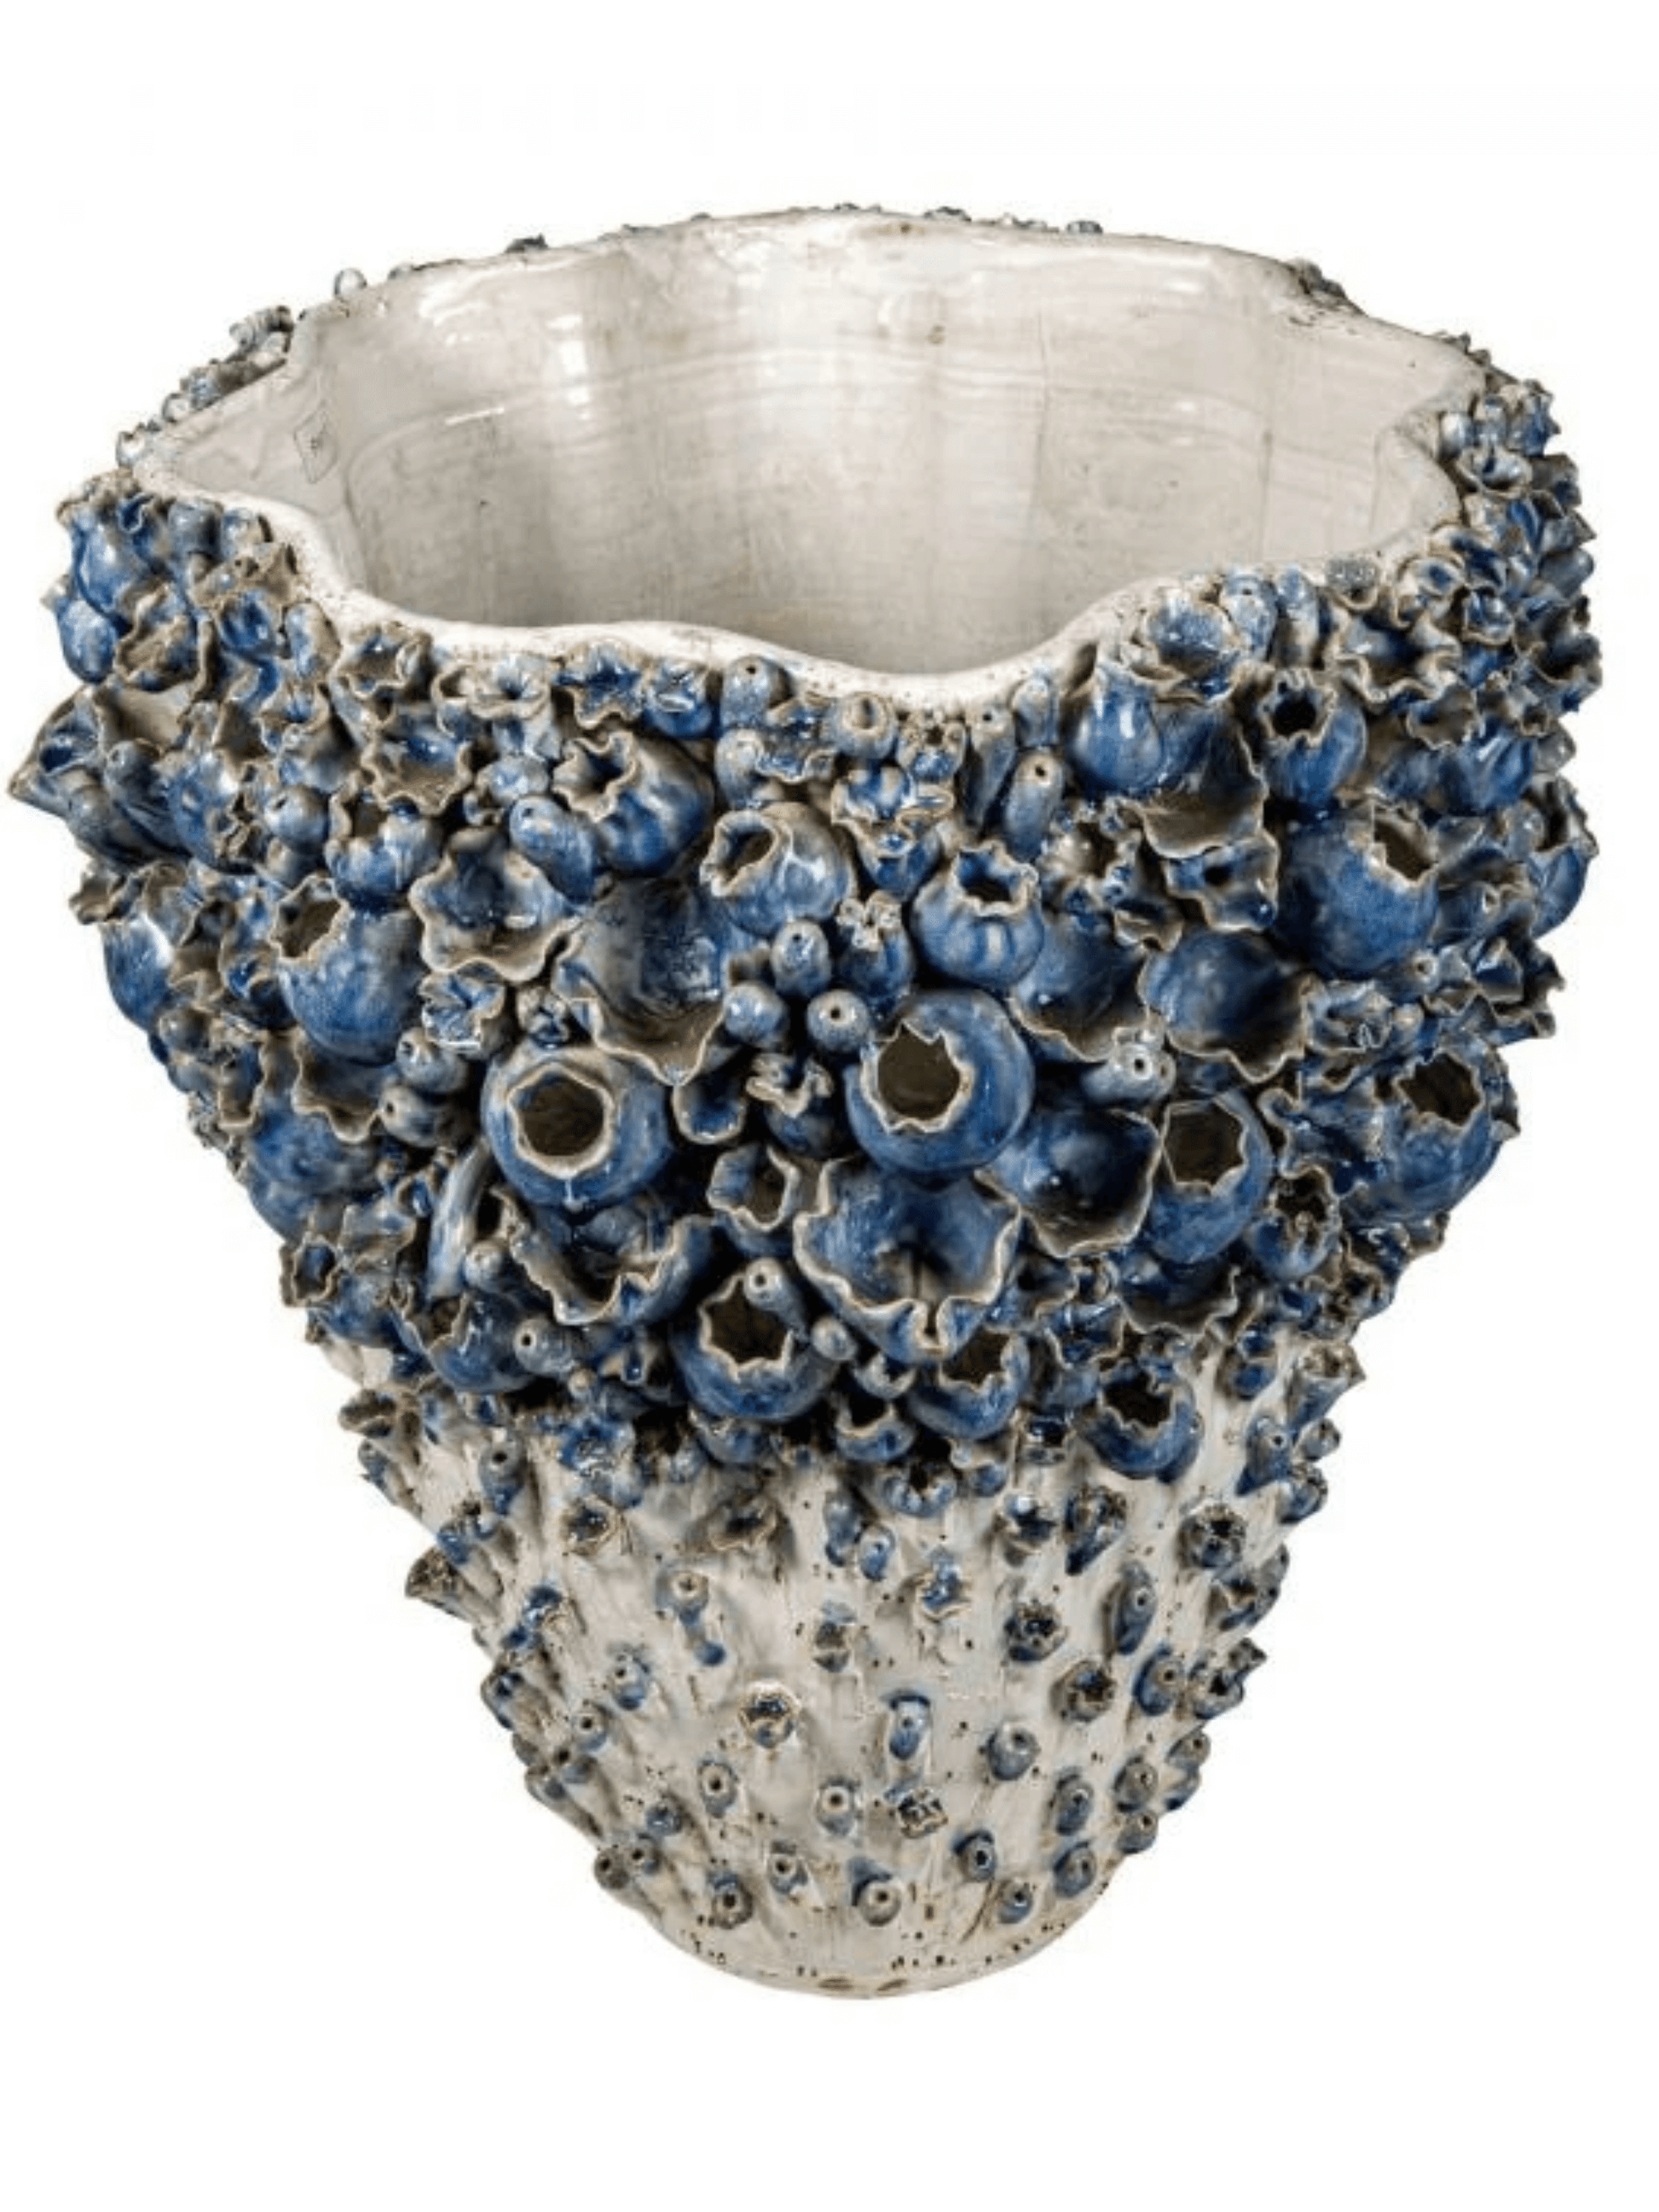 Vase Ceramic White with Hand-crafted Blue Flowers- Shop Charlies Interiors